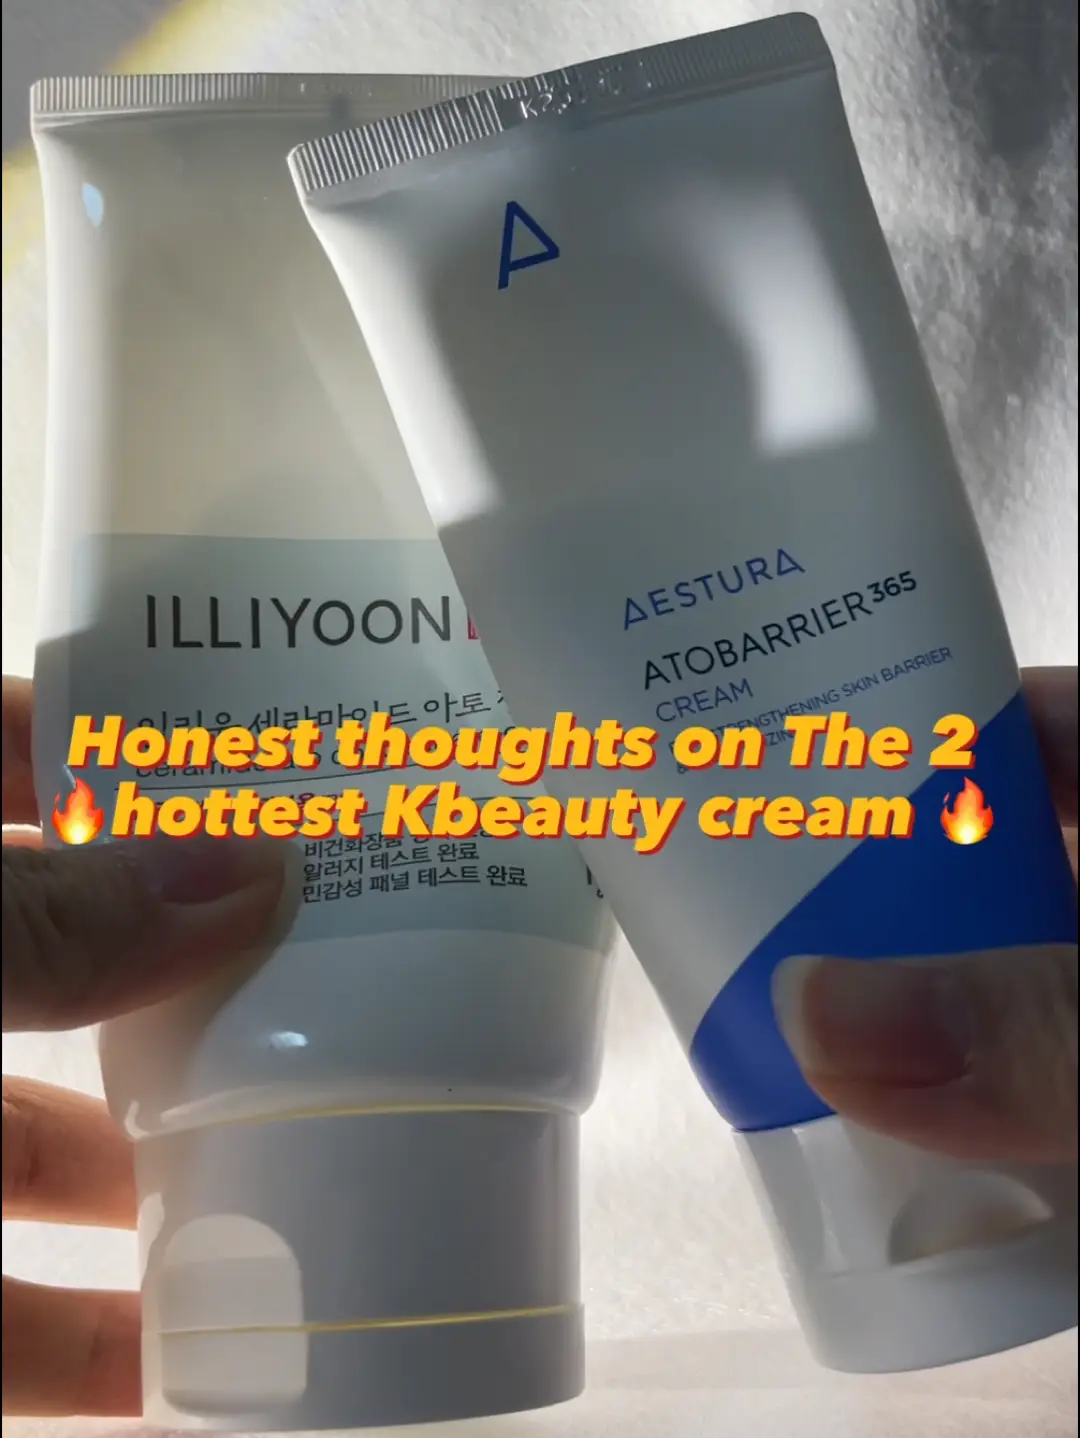 My take on the 2 hottest kbeauty cream🤩's images